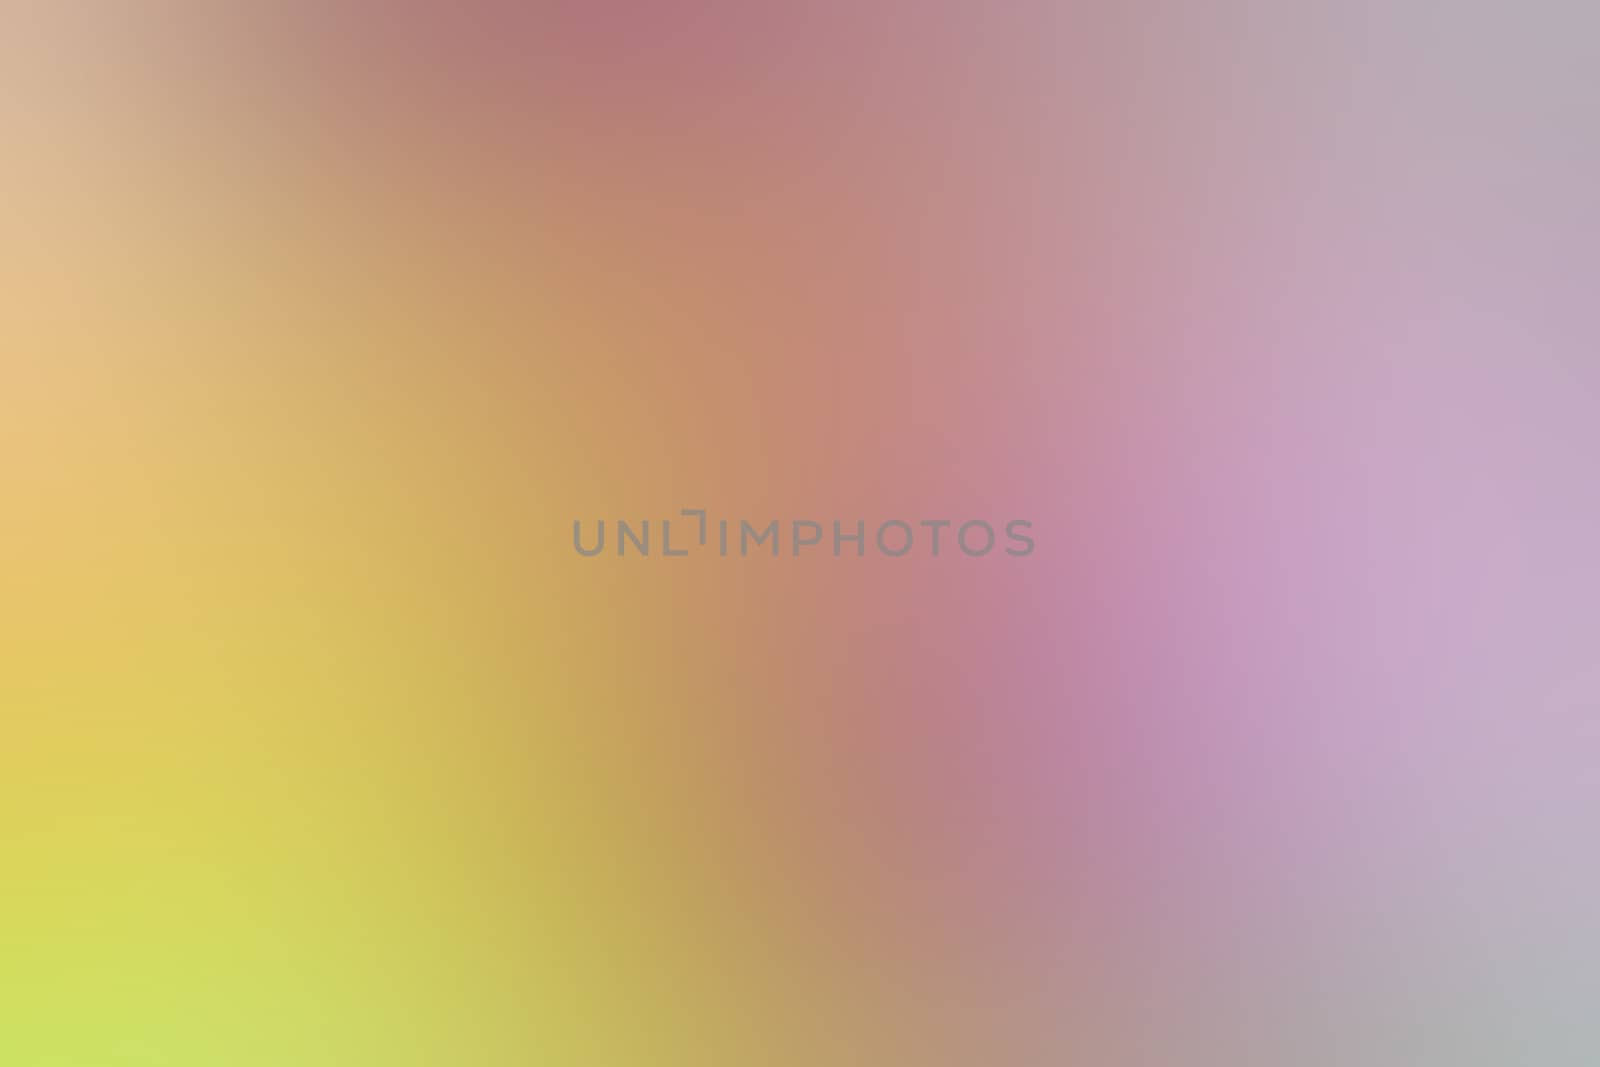 blurred gradient yellow pink hue colorful pastel soft background illustration for cosmetics banner advertising background by cgdeaw